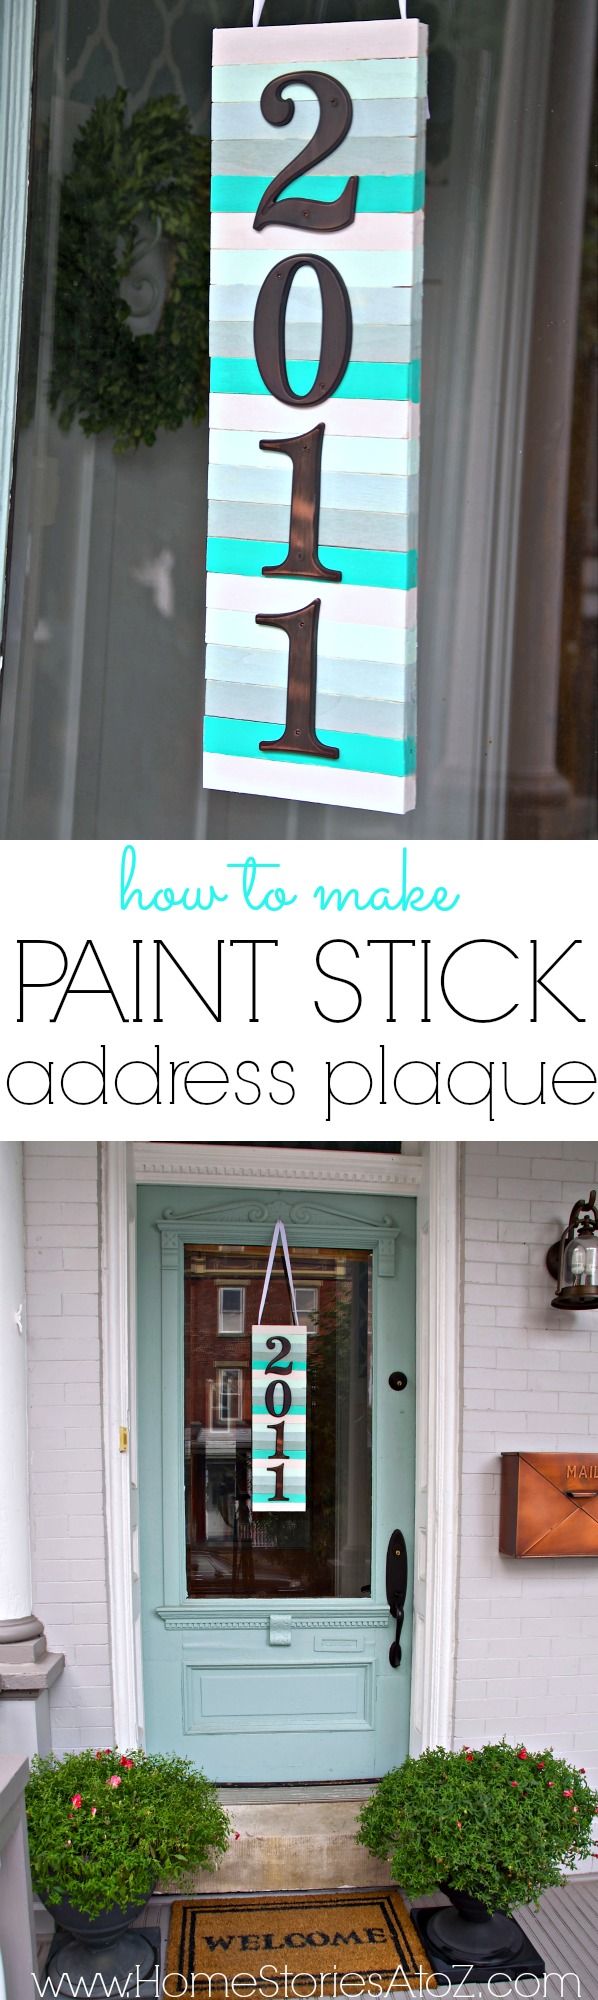 Easy craft to whip up. Paint stick address plaque. Makes a great housewarming pr...